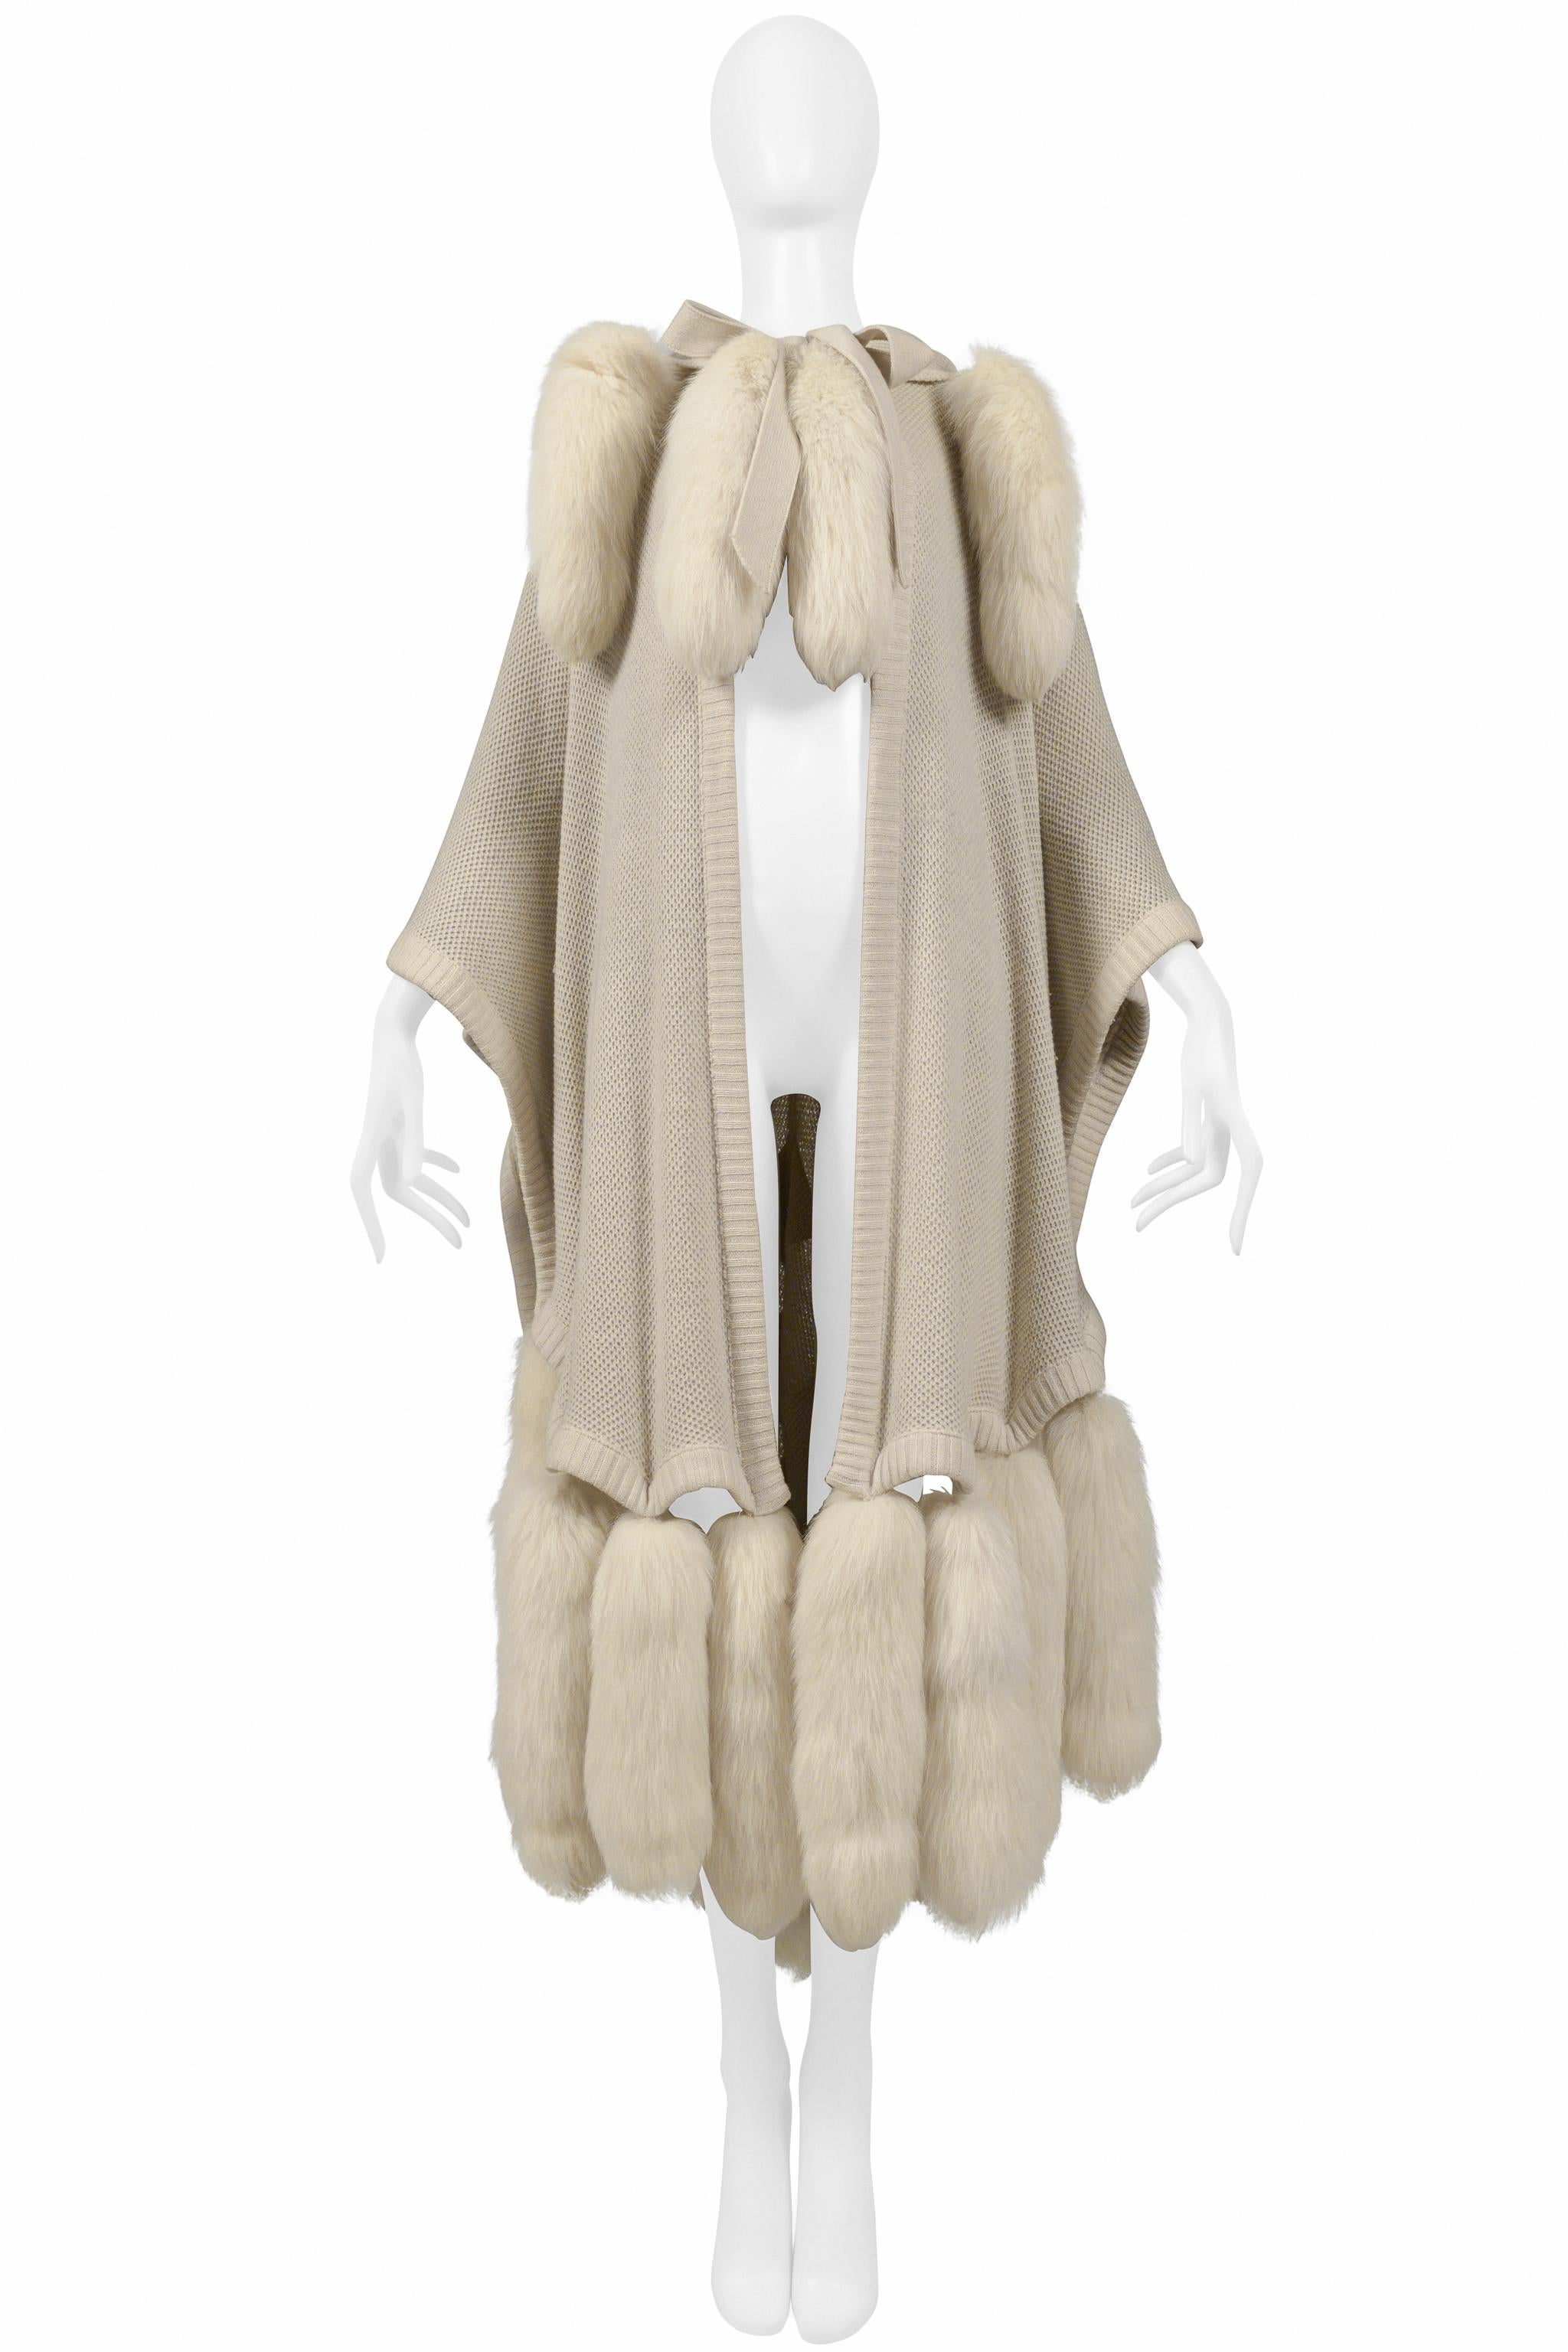 Alimia Paris Off-White Cape With Fur Tails & Leather Patches For Sale 1